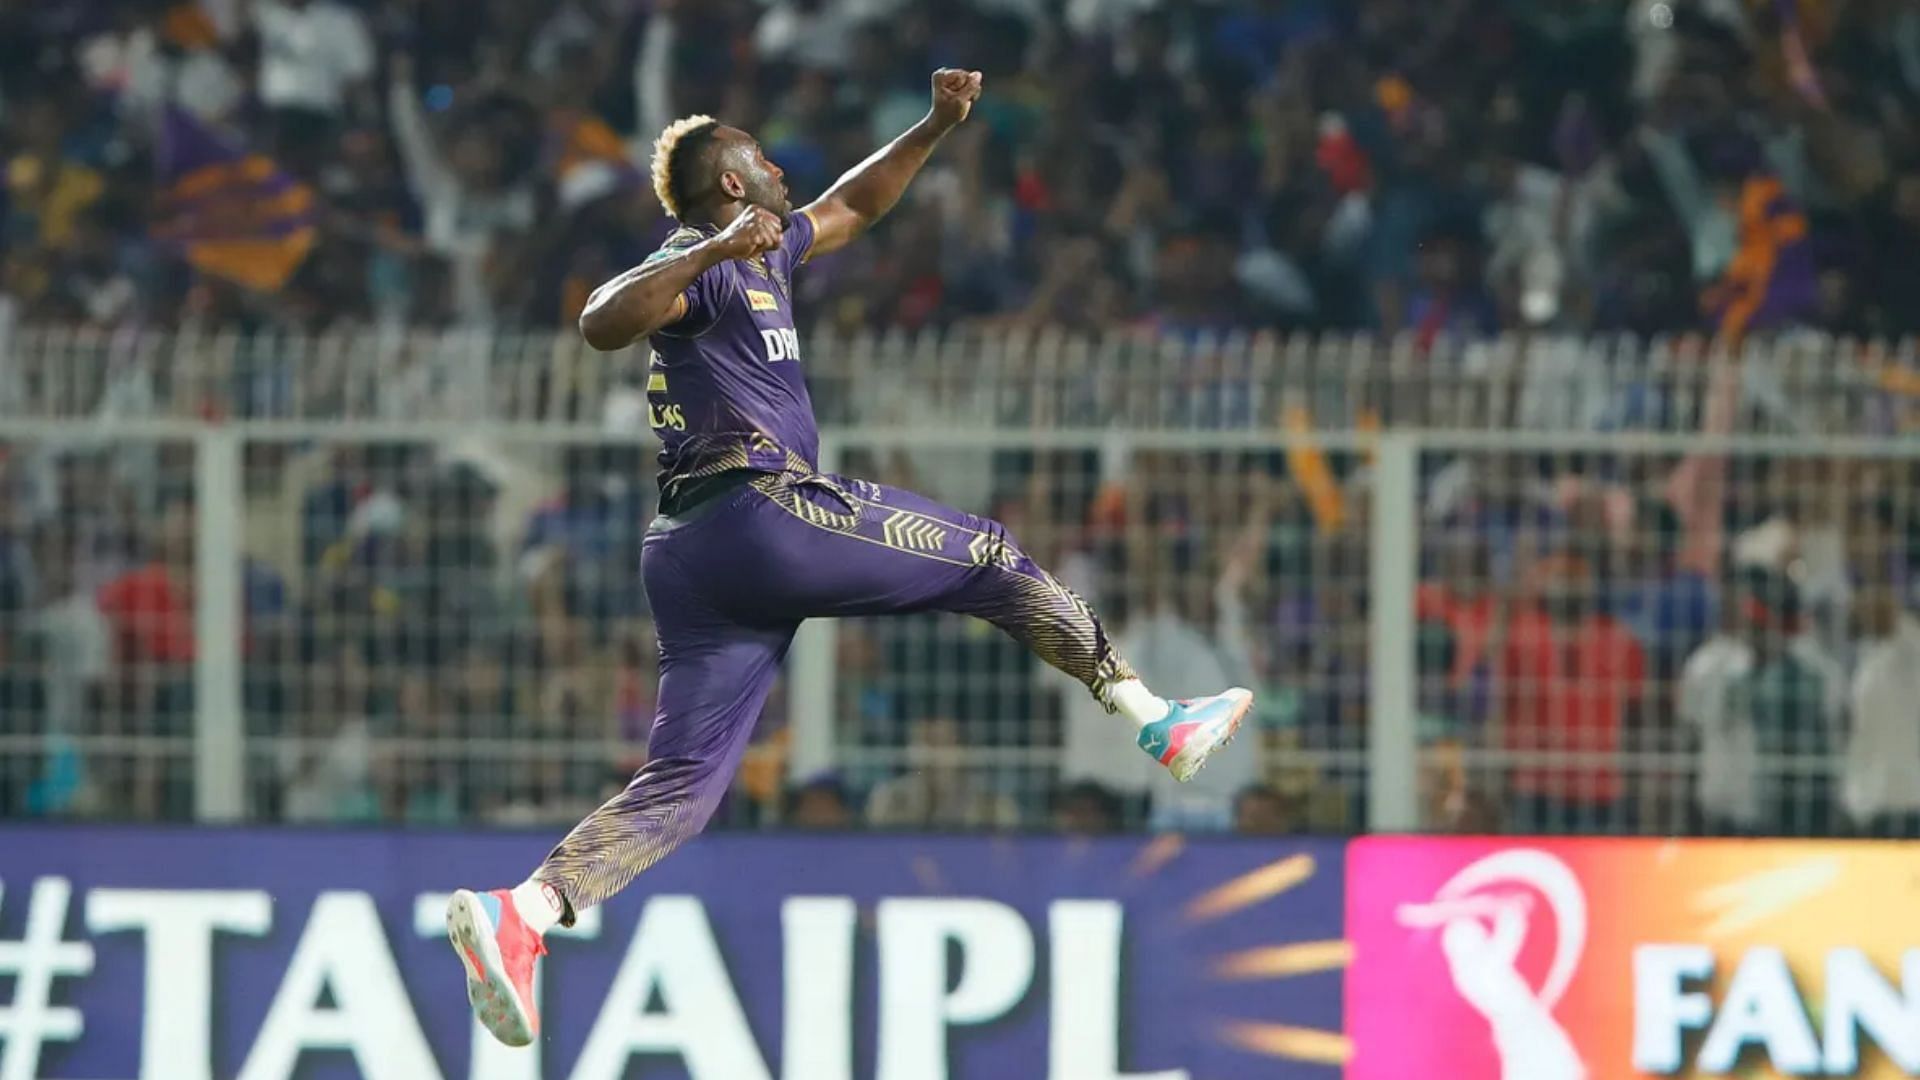 Andre Russell starred with 3/25 to get KKR a thrilling win